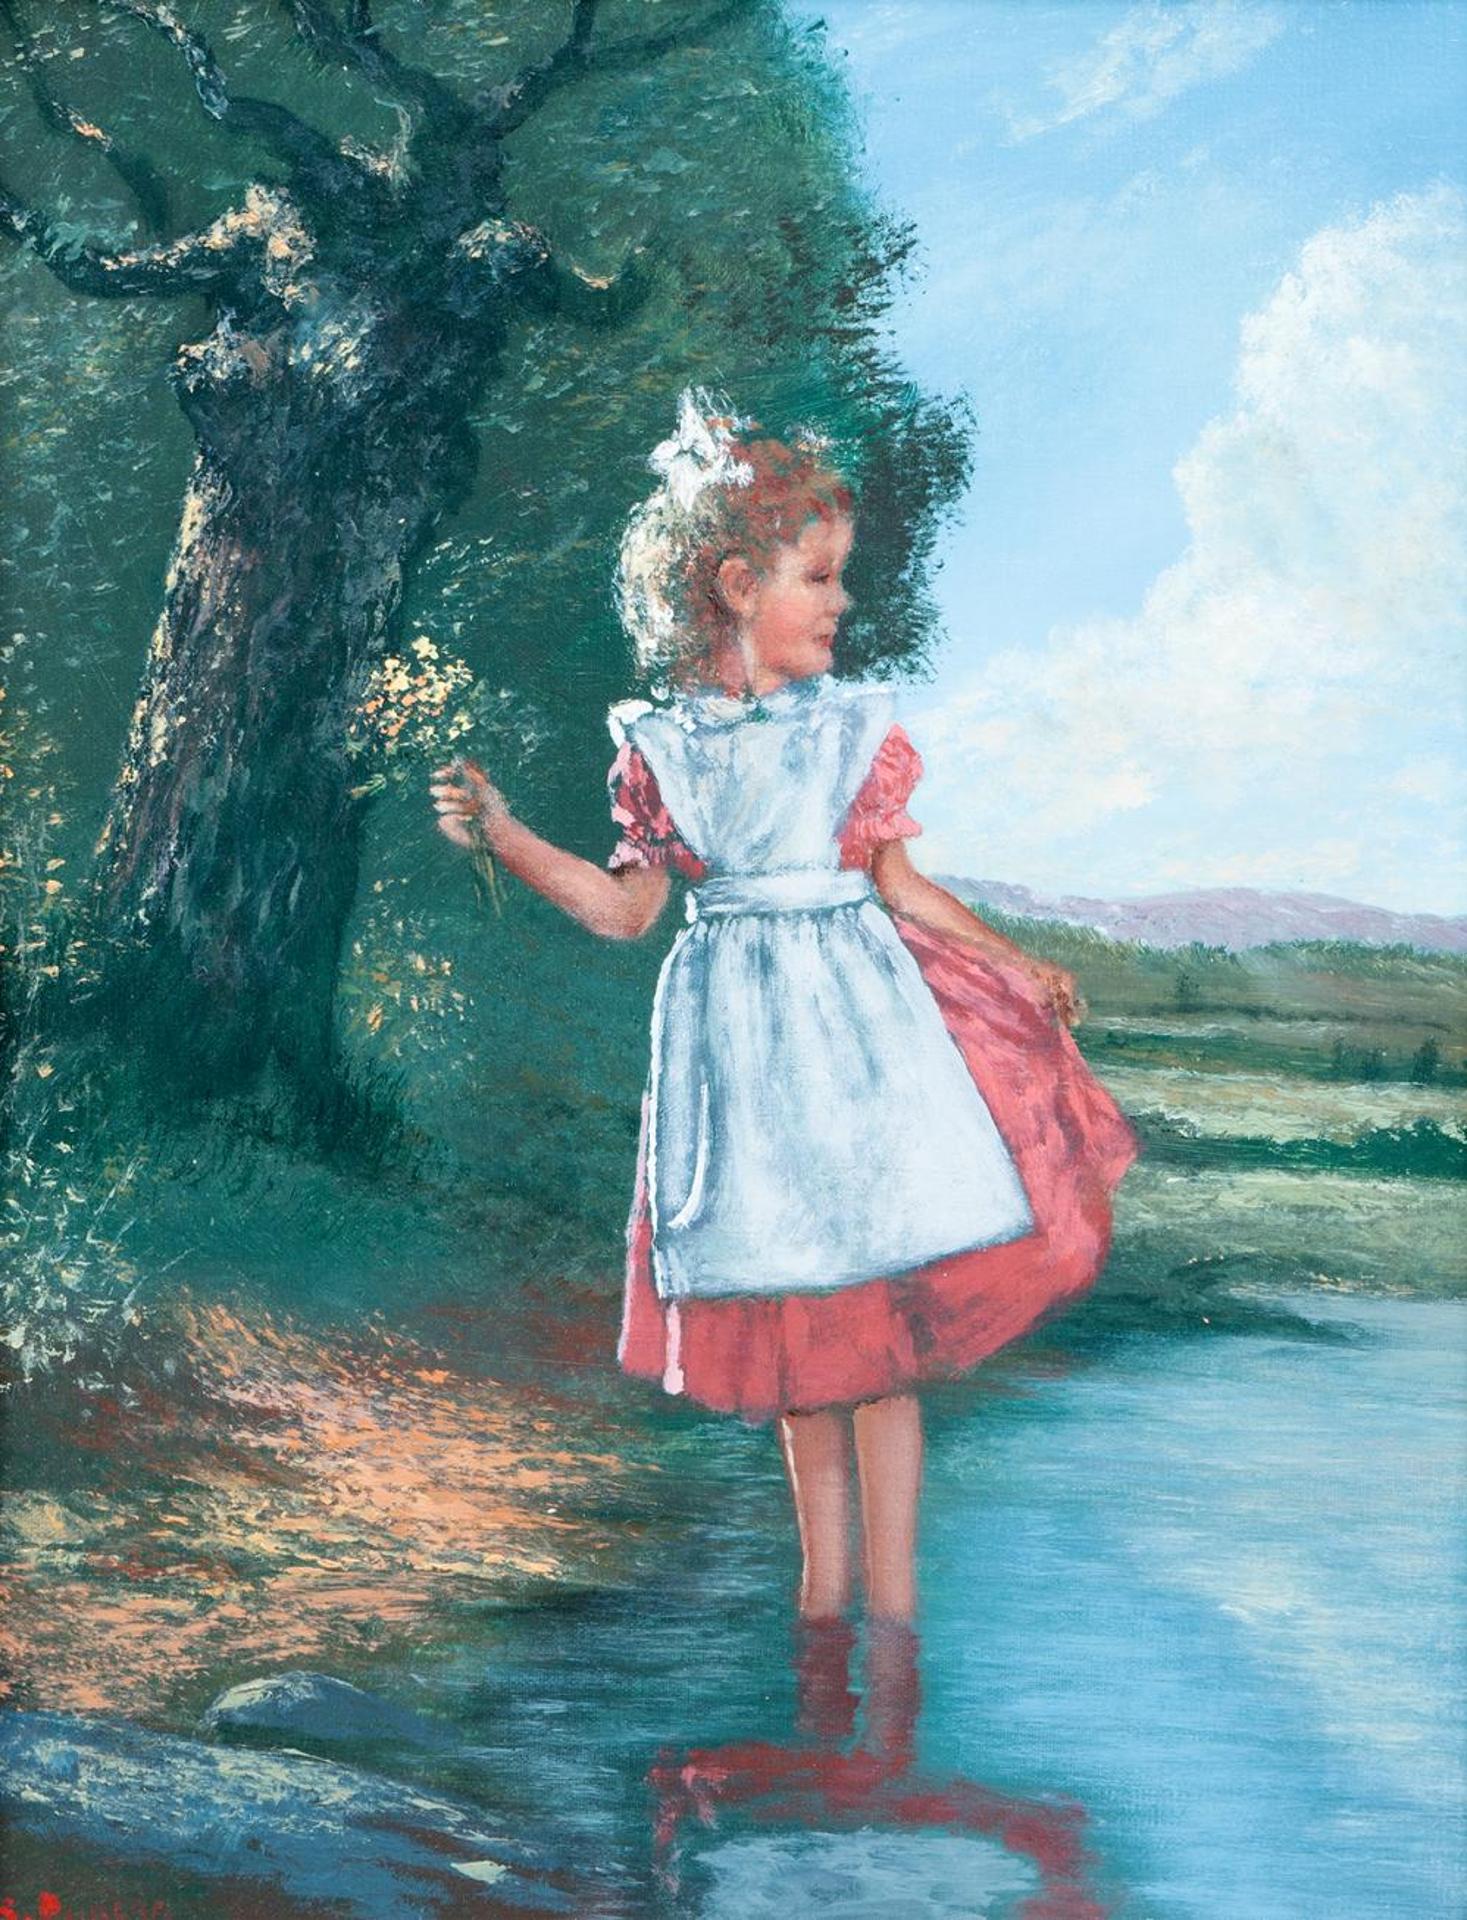 Scott Duncan (1944-2017) - Untitled - Young Girl in Stream